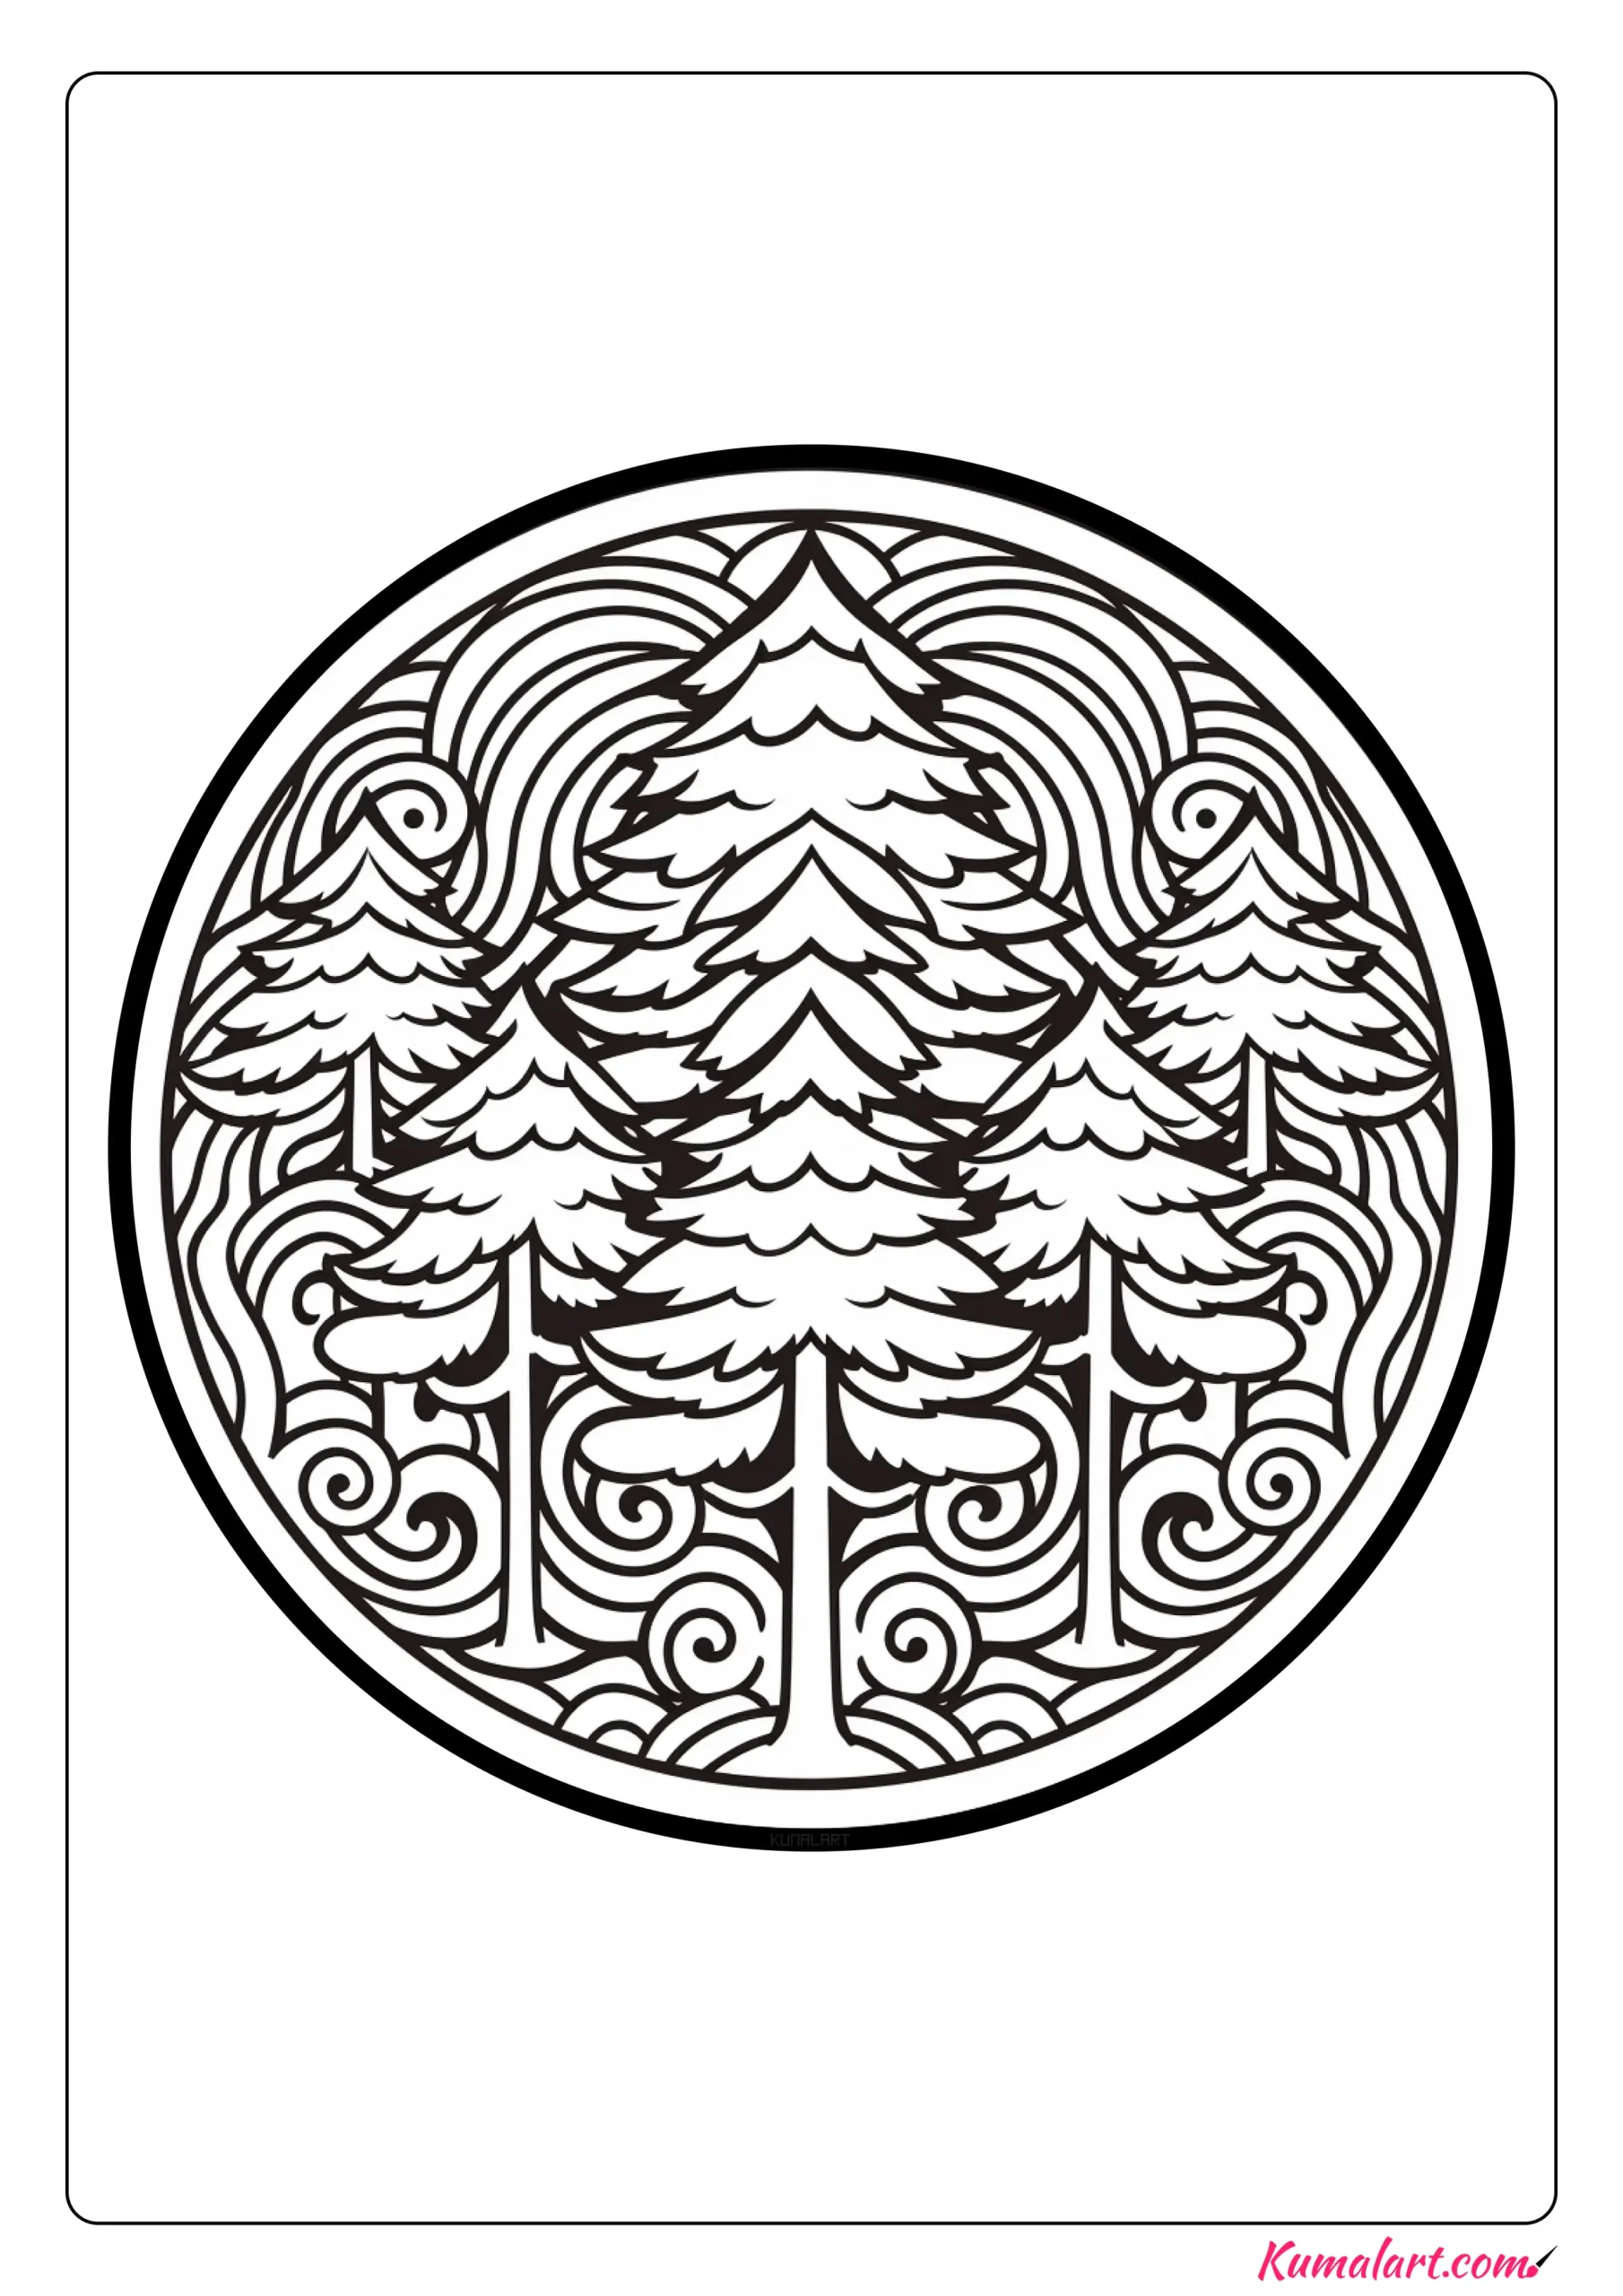 Glistening Forest Coloring Page